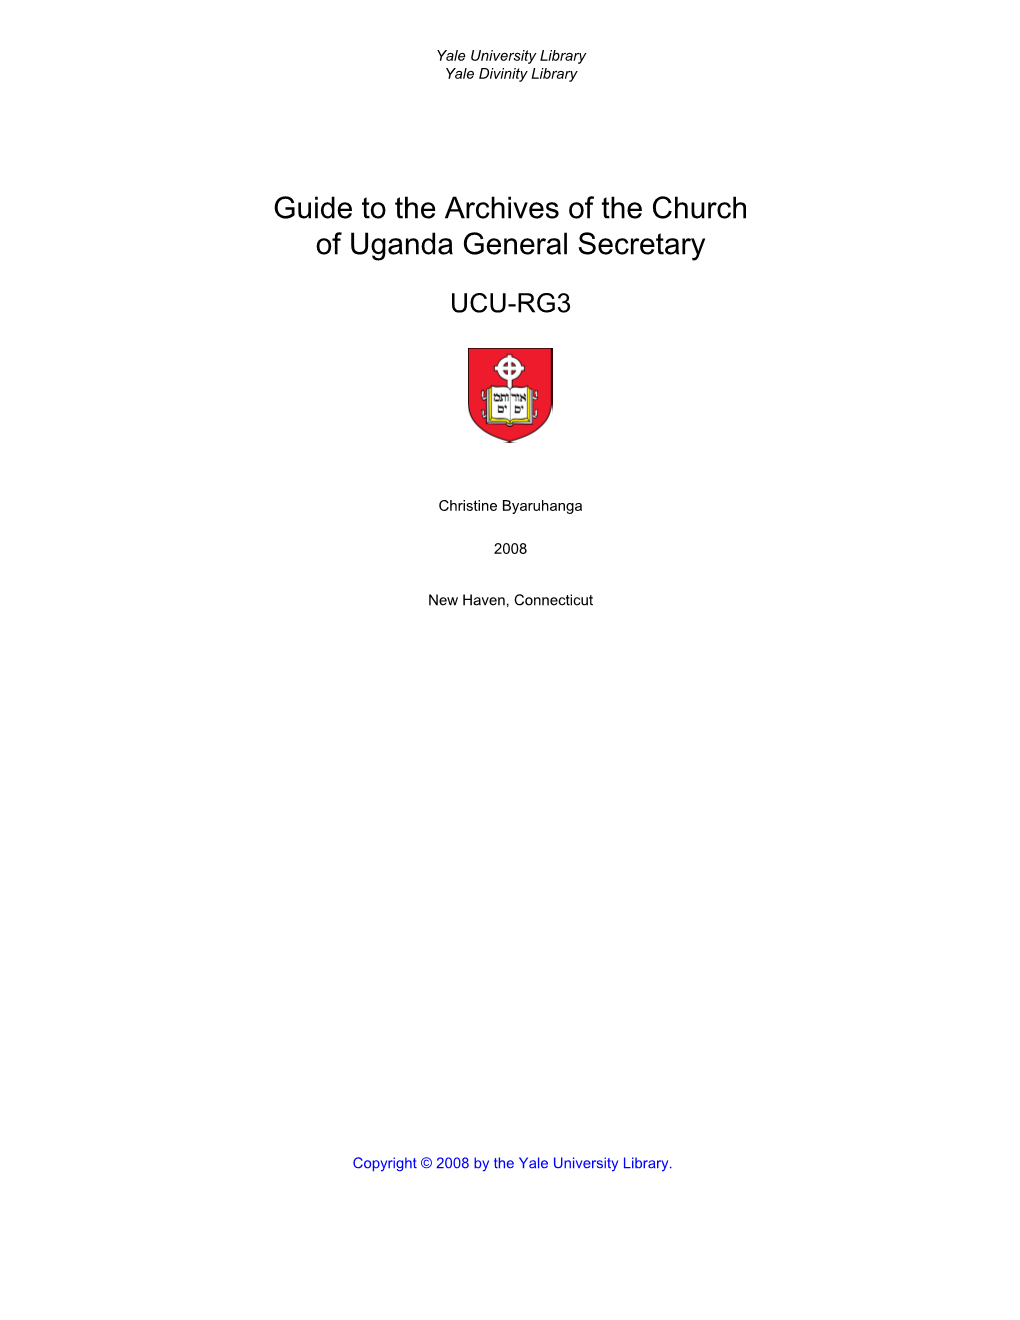 Guide to the Archives of the Church of Uganda General Secretary